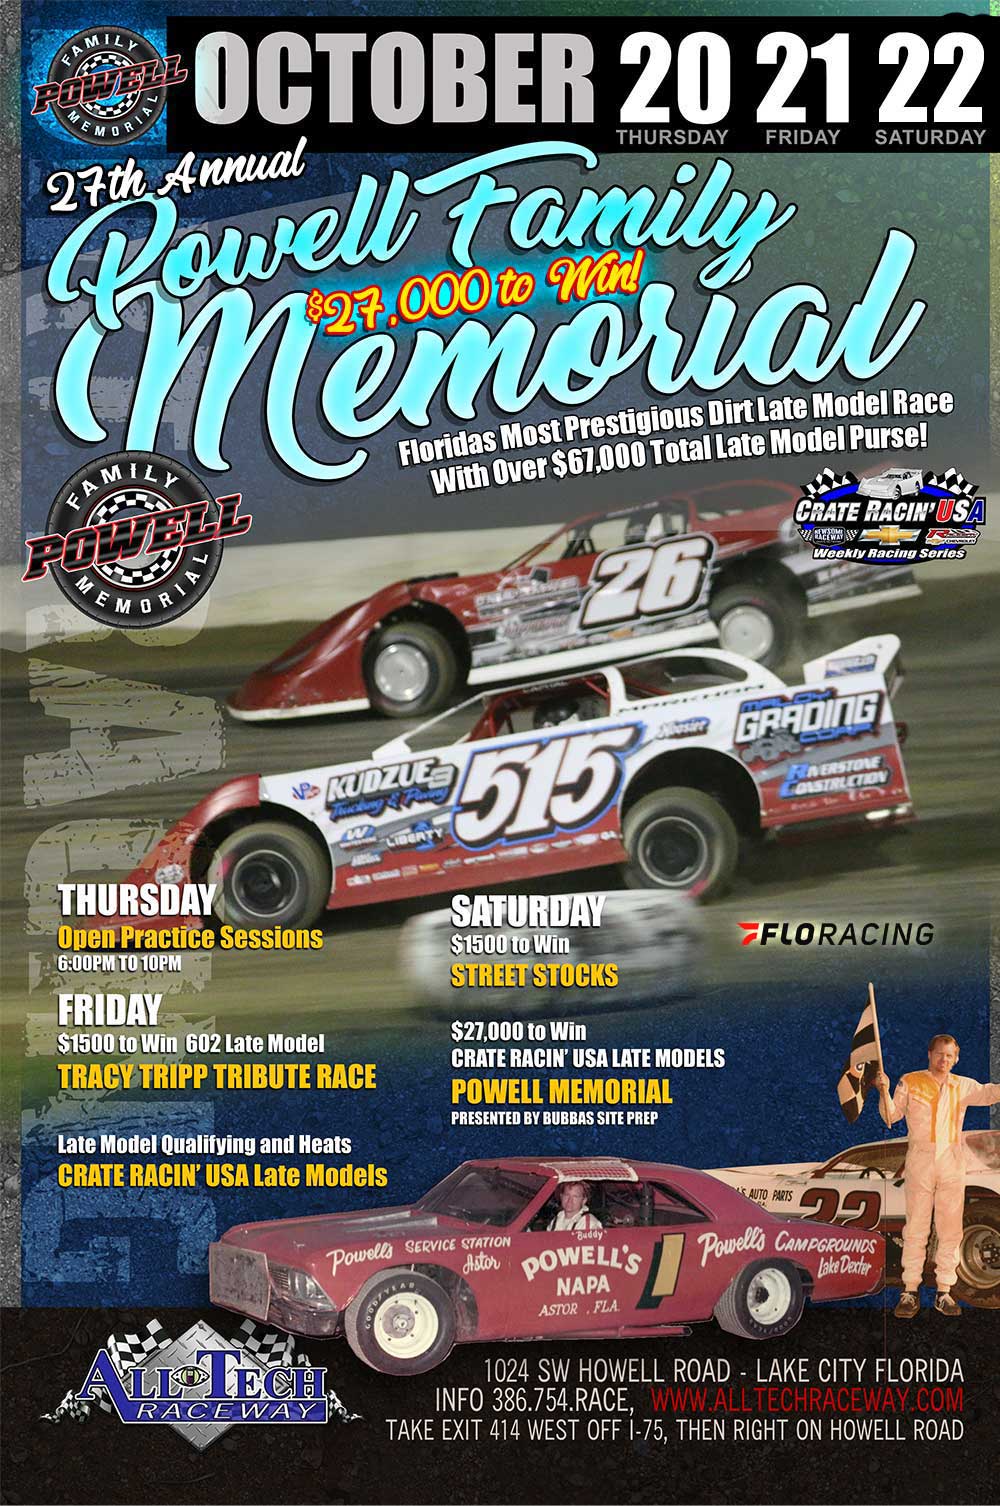 It’s almost time for “Florida’s Crown Jewel Dirt Late Model Event”